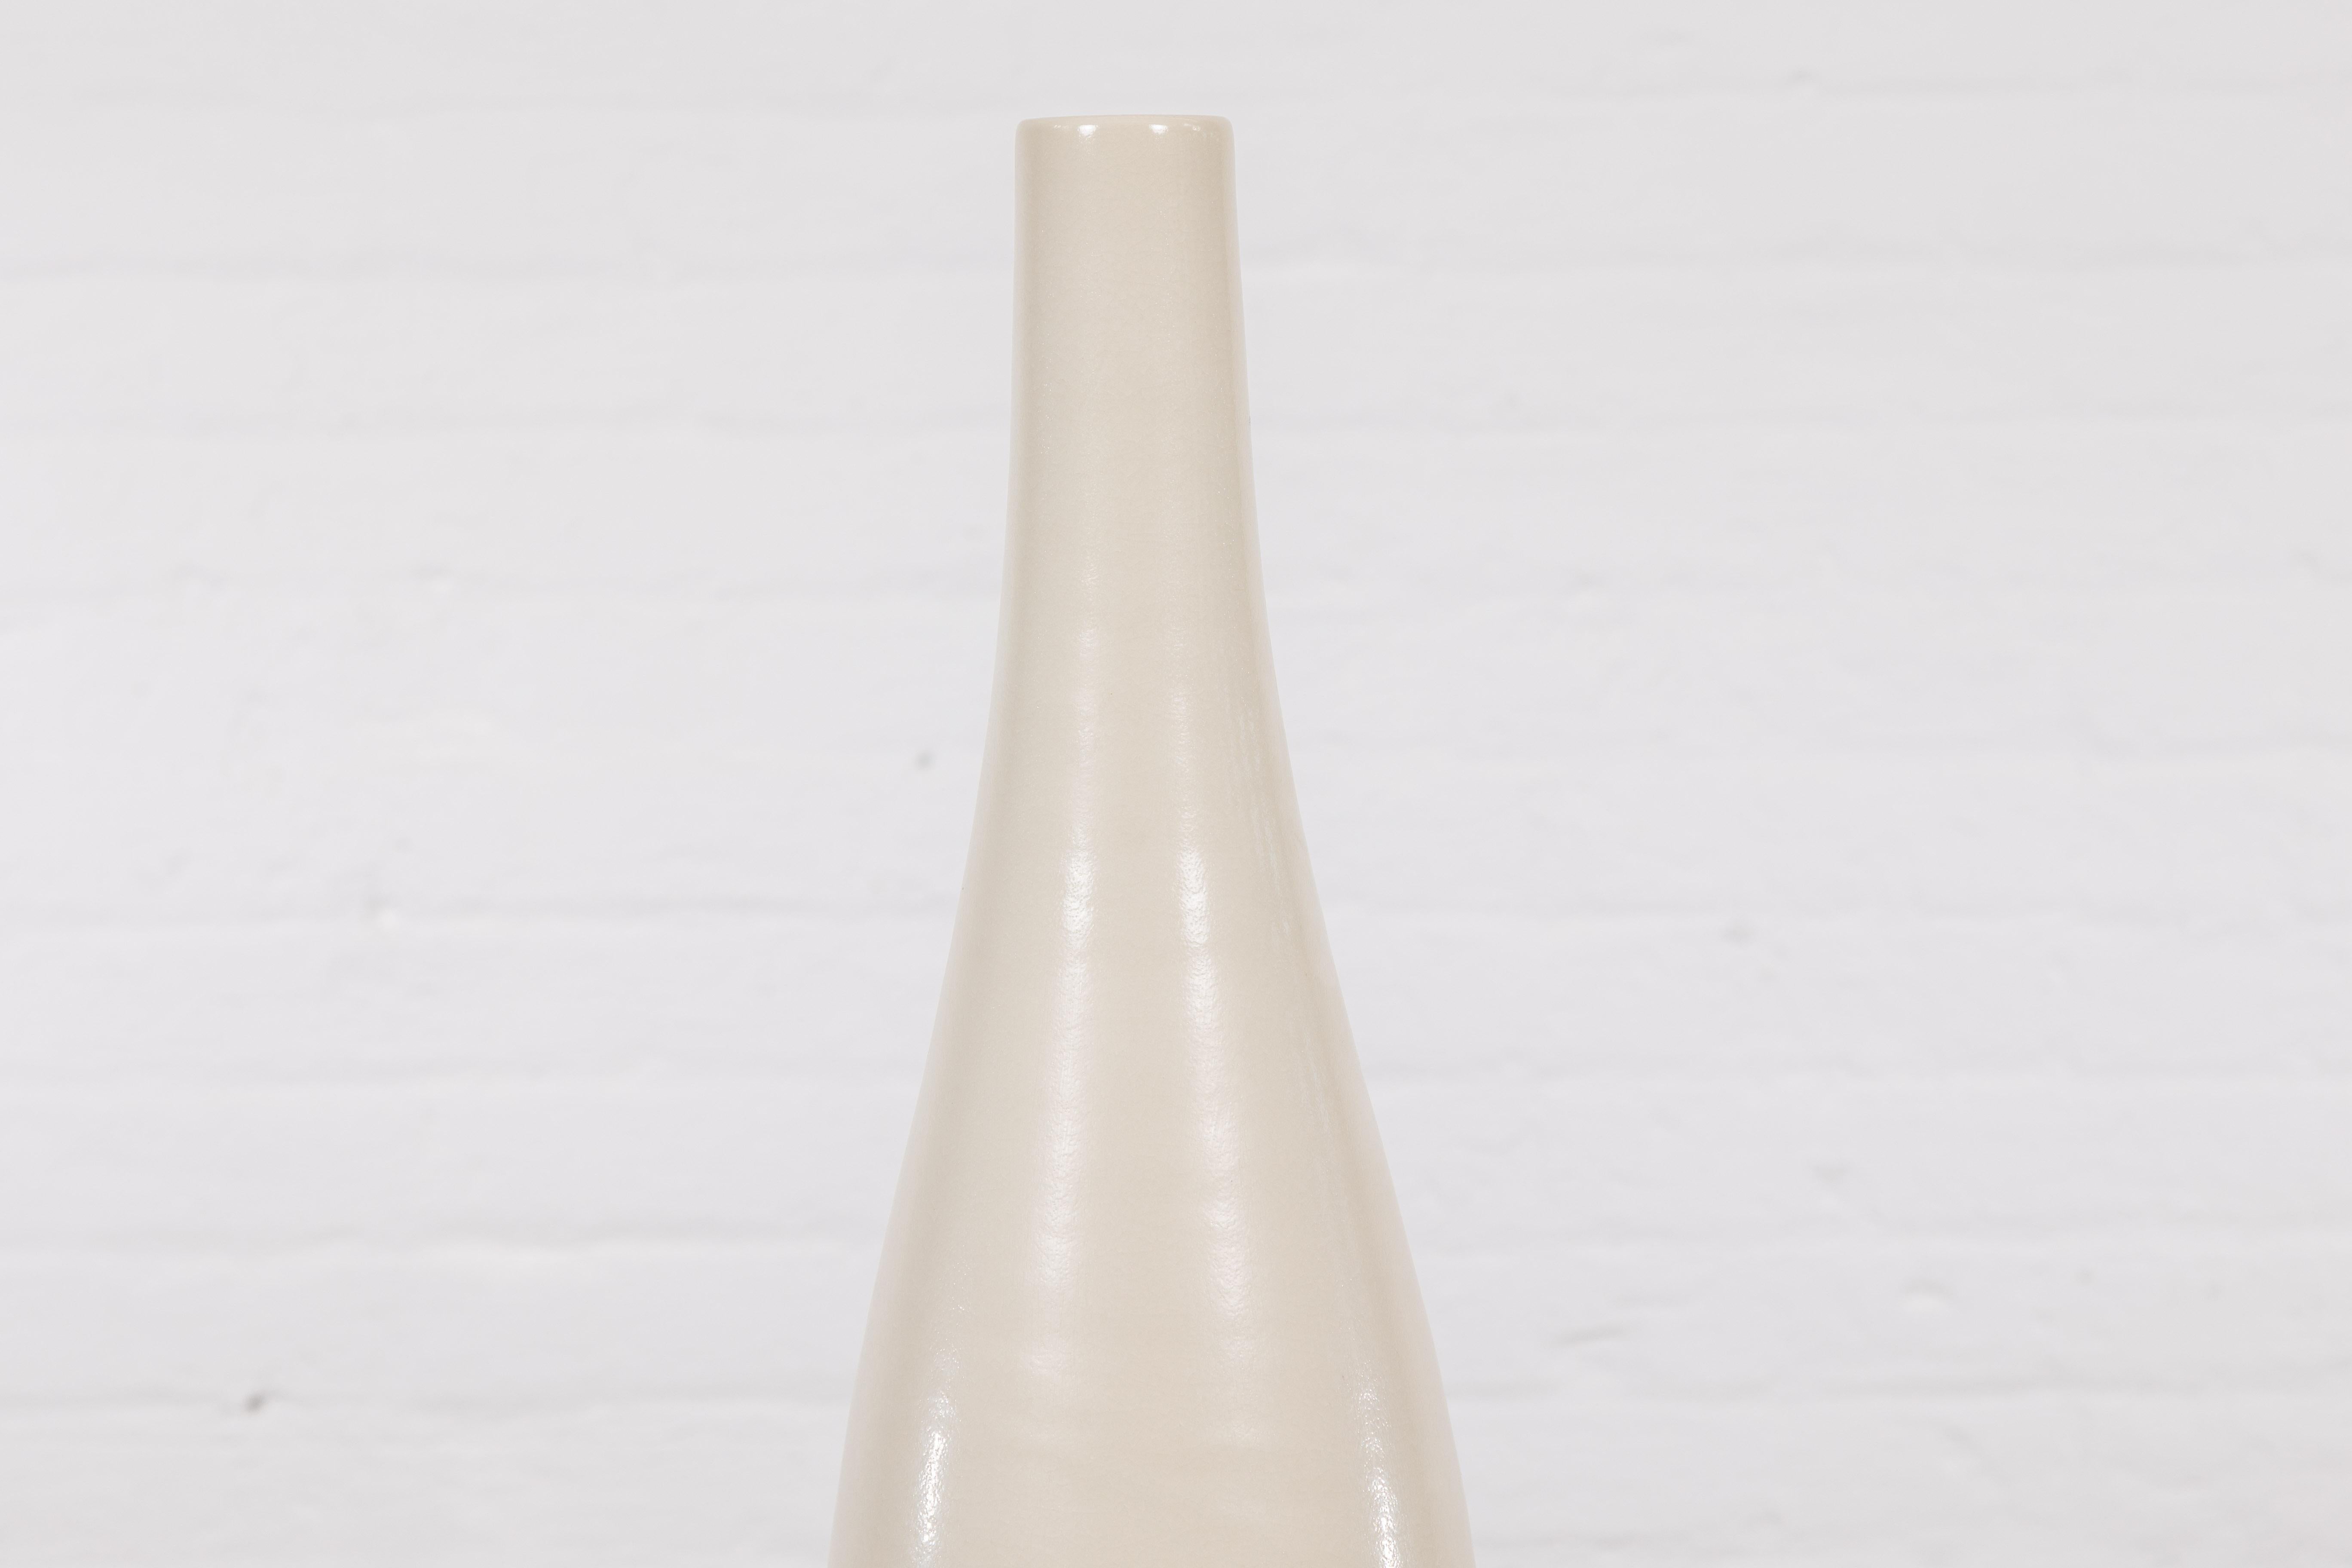 Tall Prem Collection Handmade Artisan Cream Glaze Vase with Slender Lines In Excellent Condition For Sale In Yonkers, NY